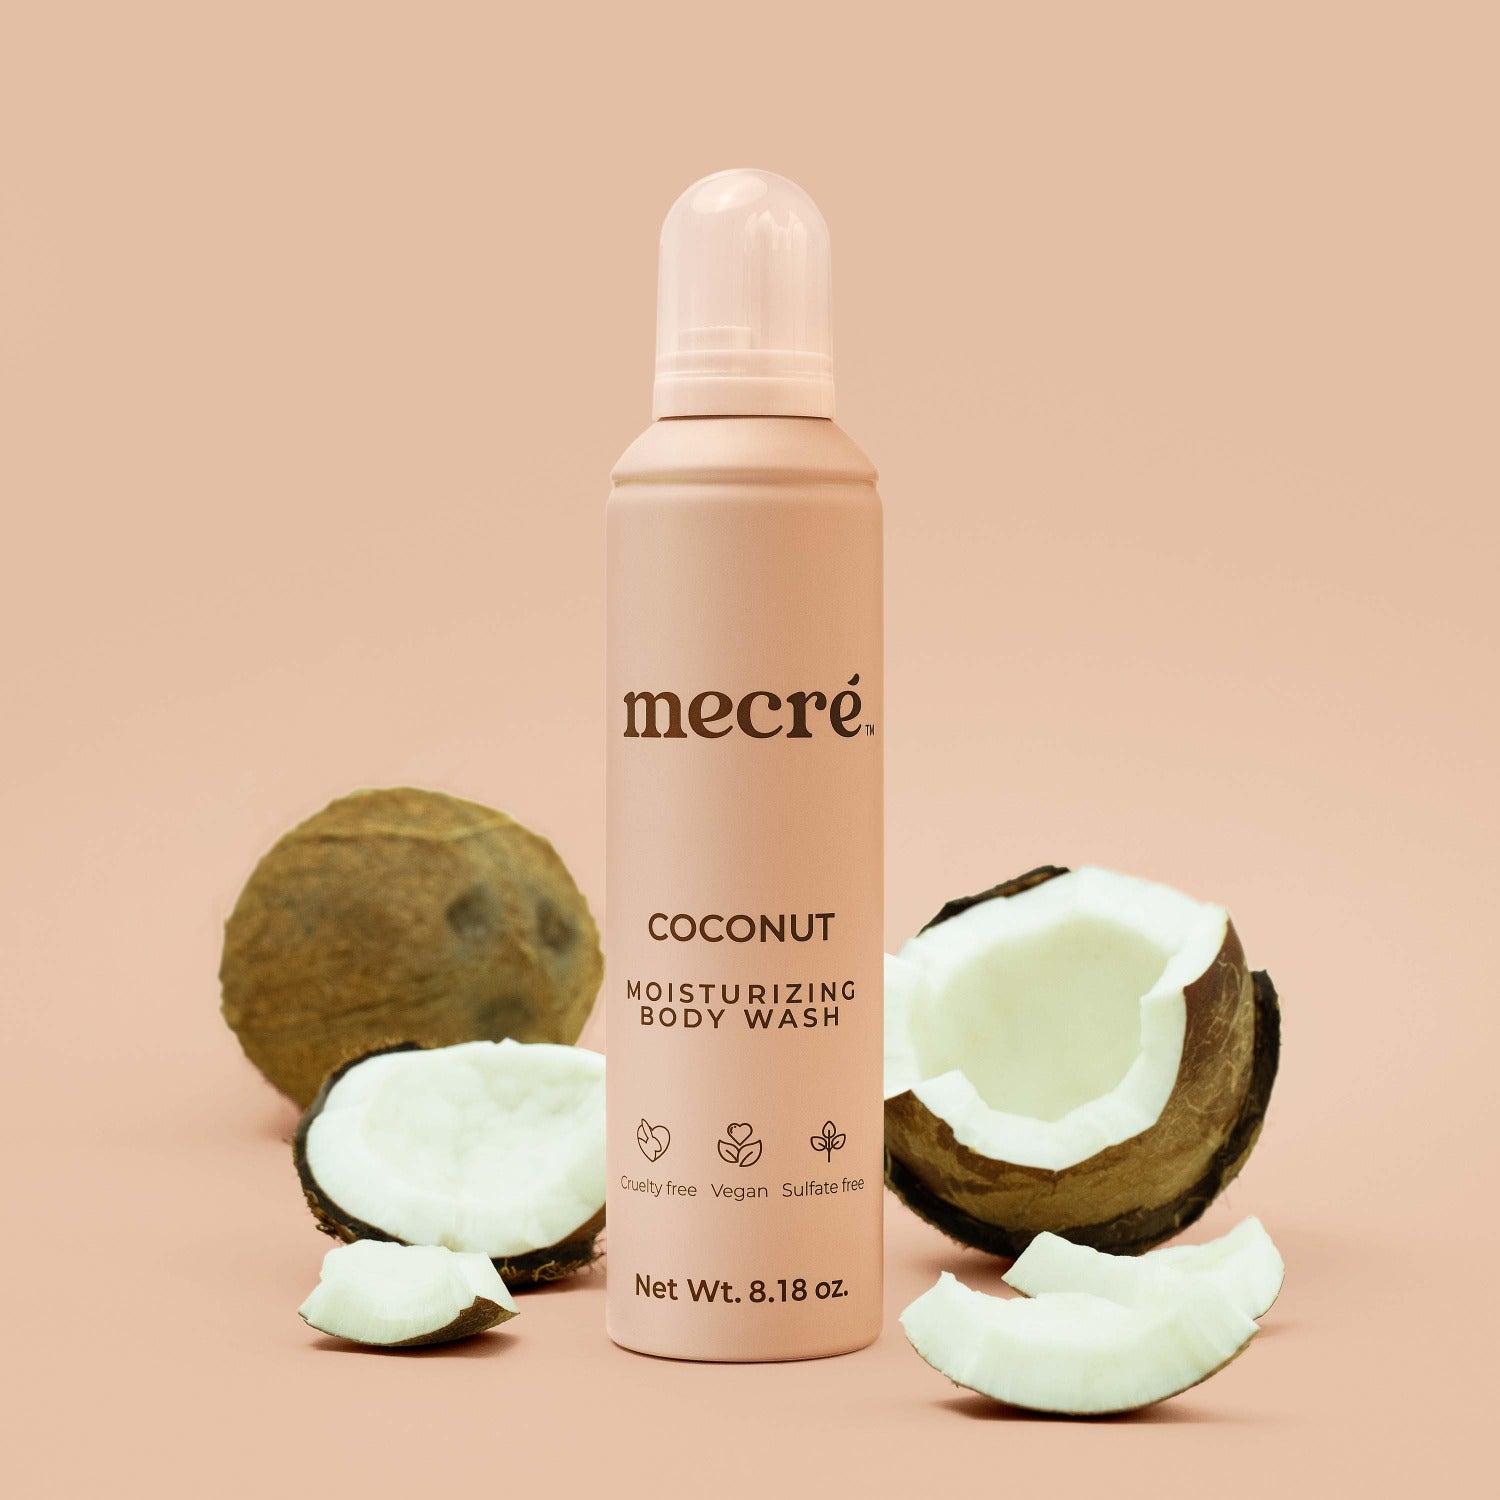 Mecré moisturizing body wash coconut-scented bottle surrounded by coconuts.